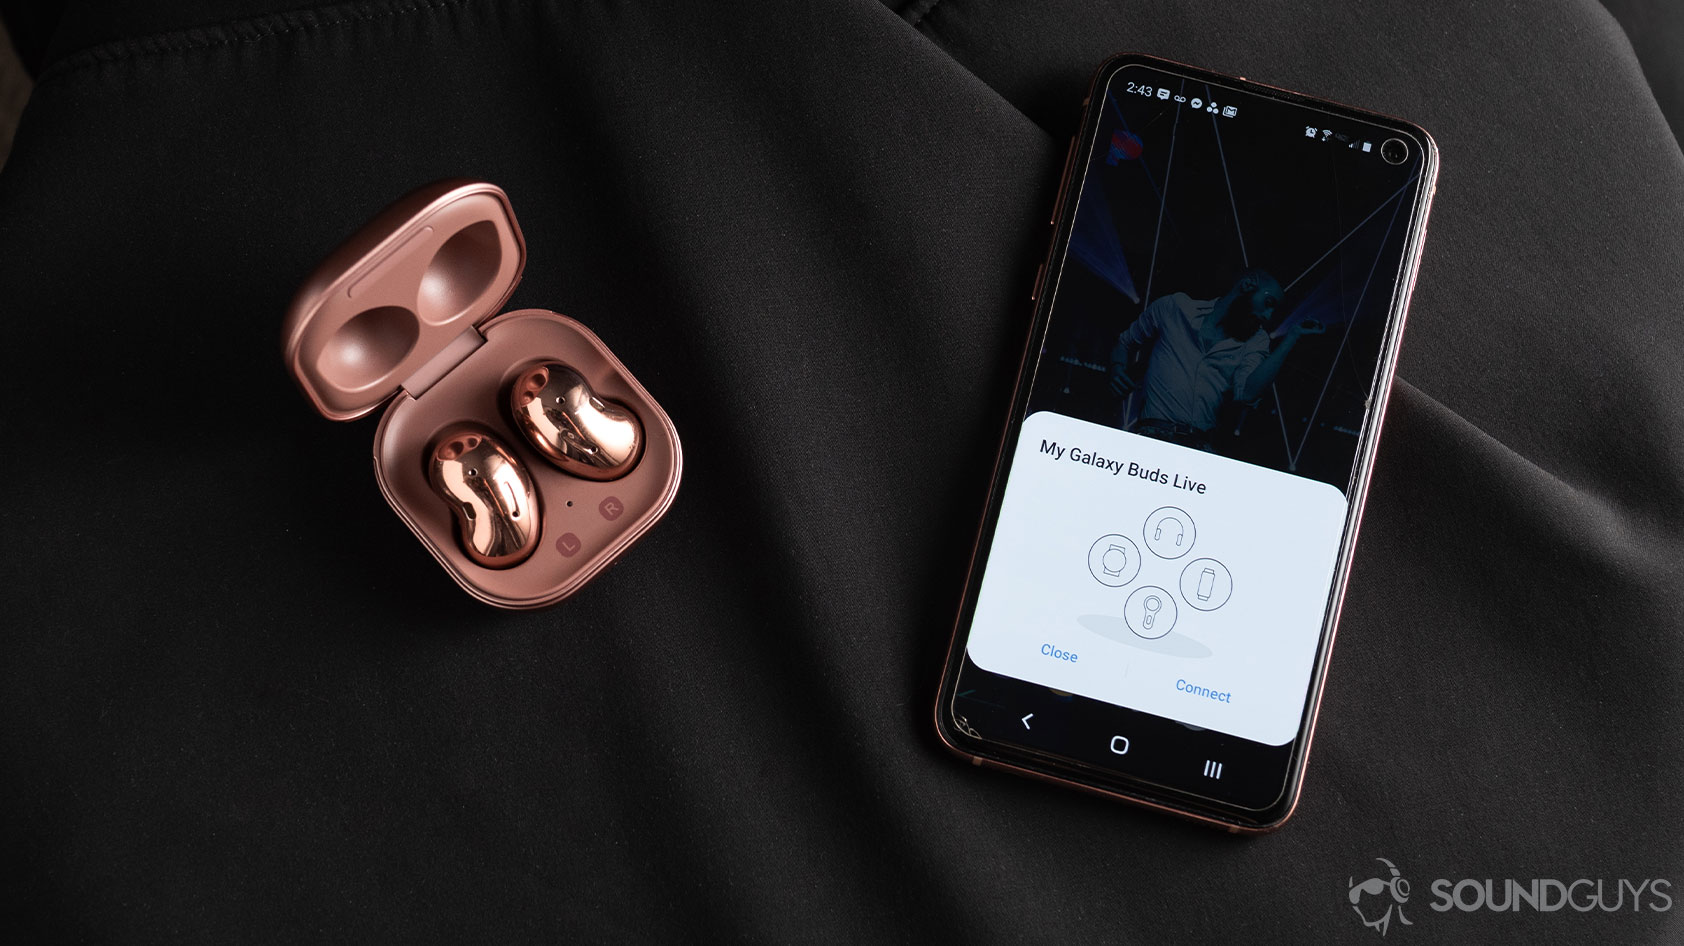 A picture of the Samsung Galaxy Buds Live noise canceling true wireless earbuds in the open case next to a Samsung Galaxy S10e smartphone with quick pairing for the Samsung Galaxy Buds Plus vs Samsung Galaxy Buds Live comparison.